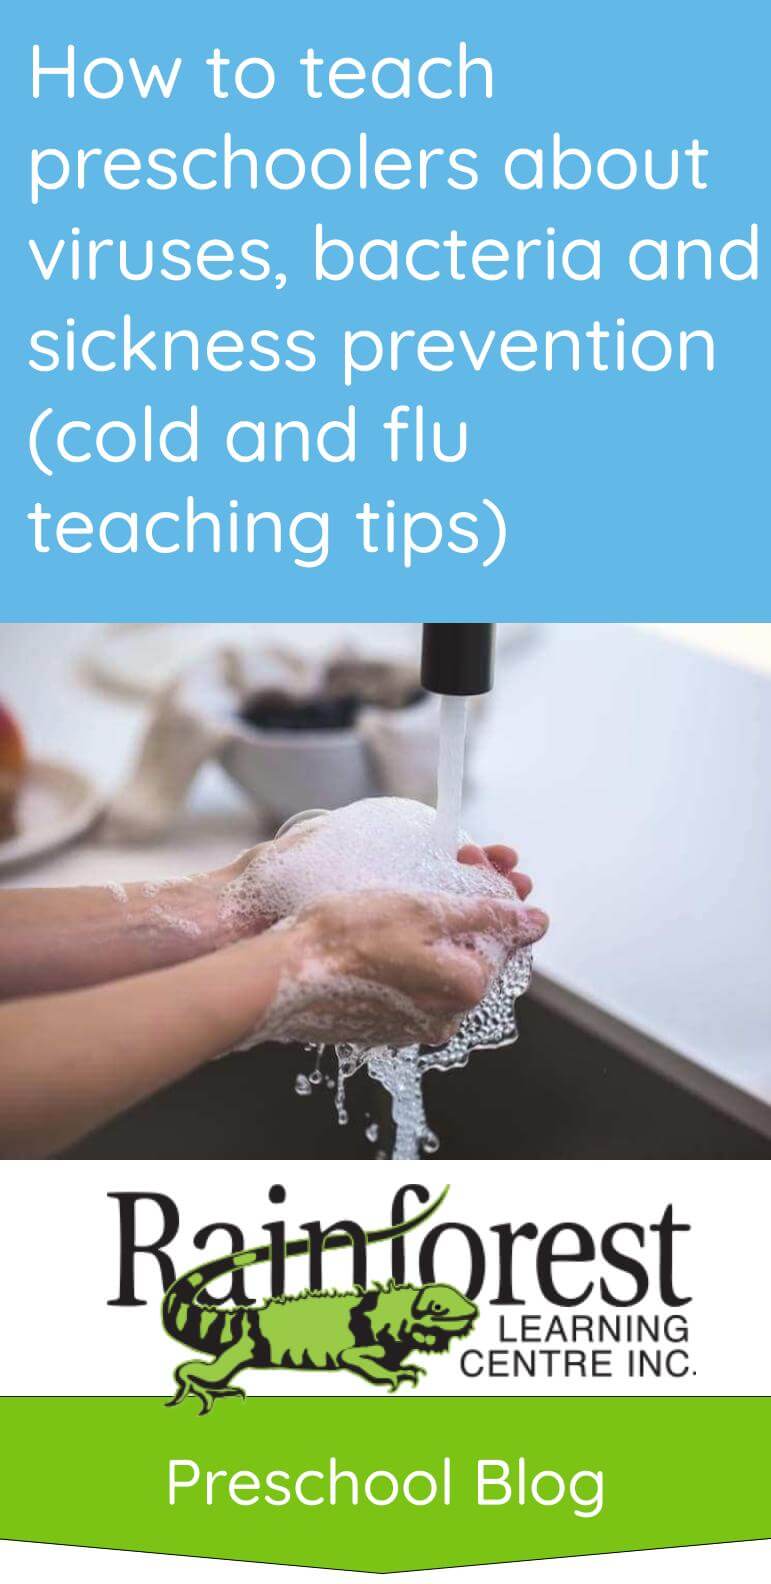 How to teach preschoolers about viruses, bacteria and sickness prevention (cold and flu teaching tips) - article Pinterest image